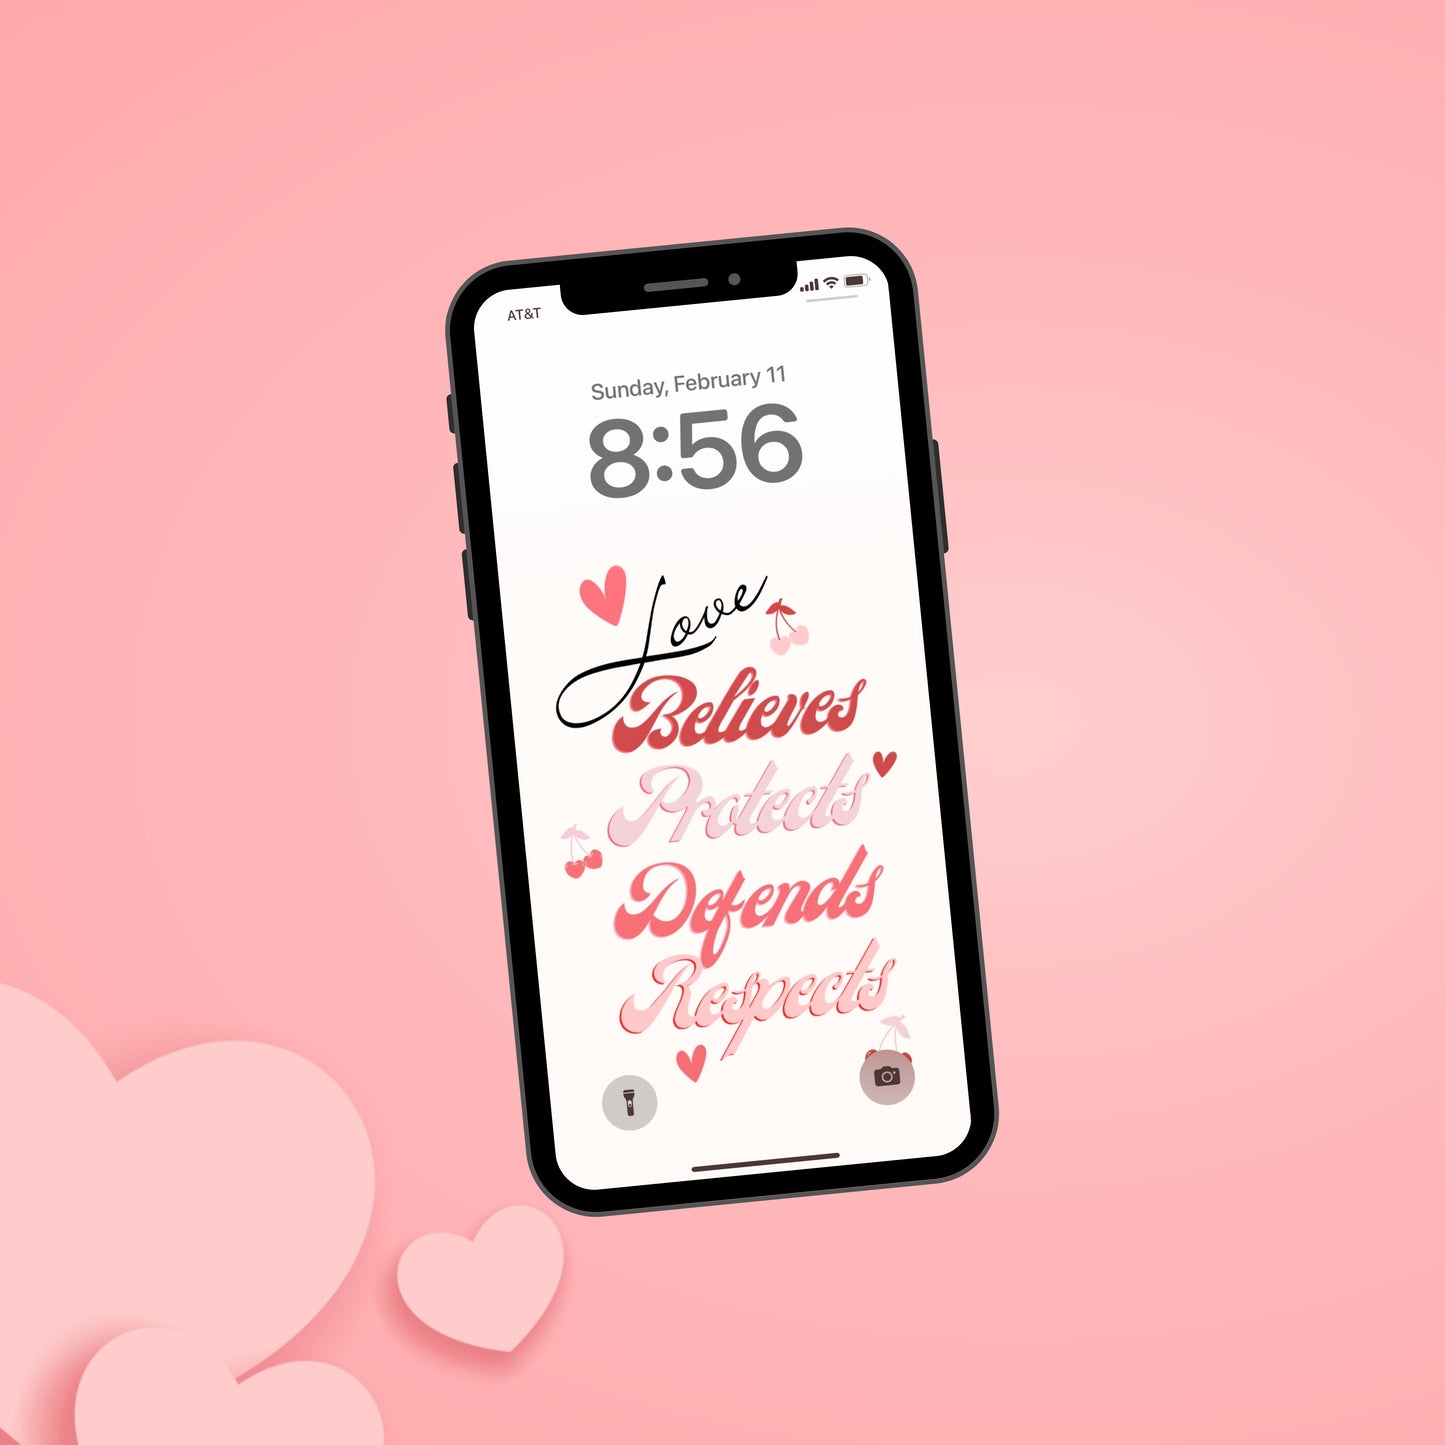 Proudly display the phrase "Love Believes Protects Defends Respects" in a beautiful red and pink retro font. Let your device be a beacon of empowerment reminding everyone what true love is for a survivor. Make your devices your daily affirmations.